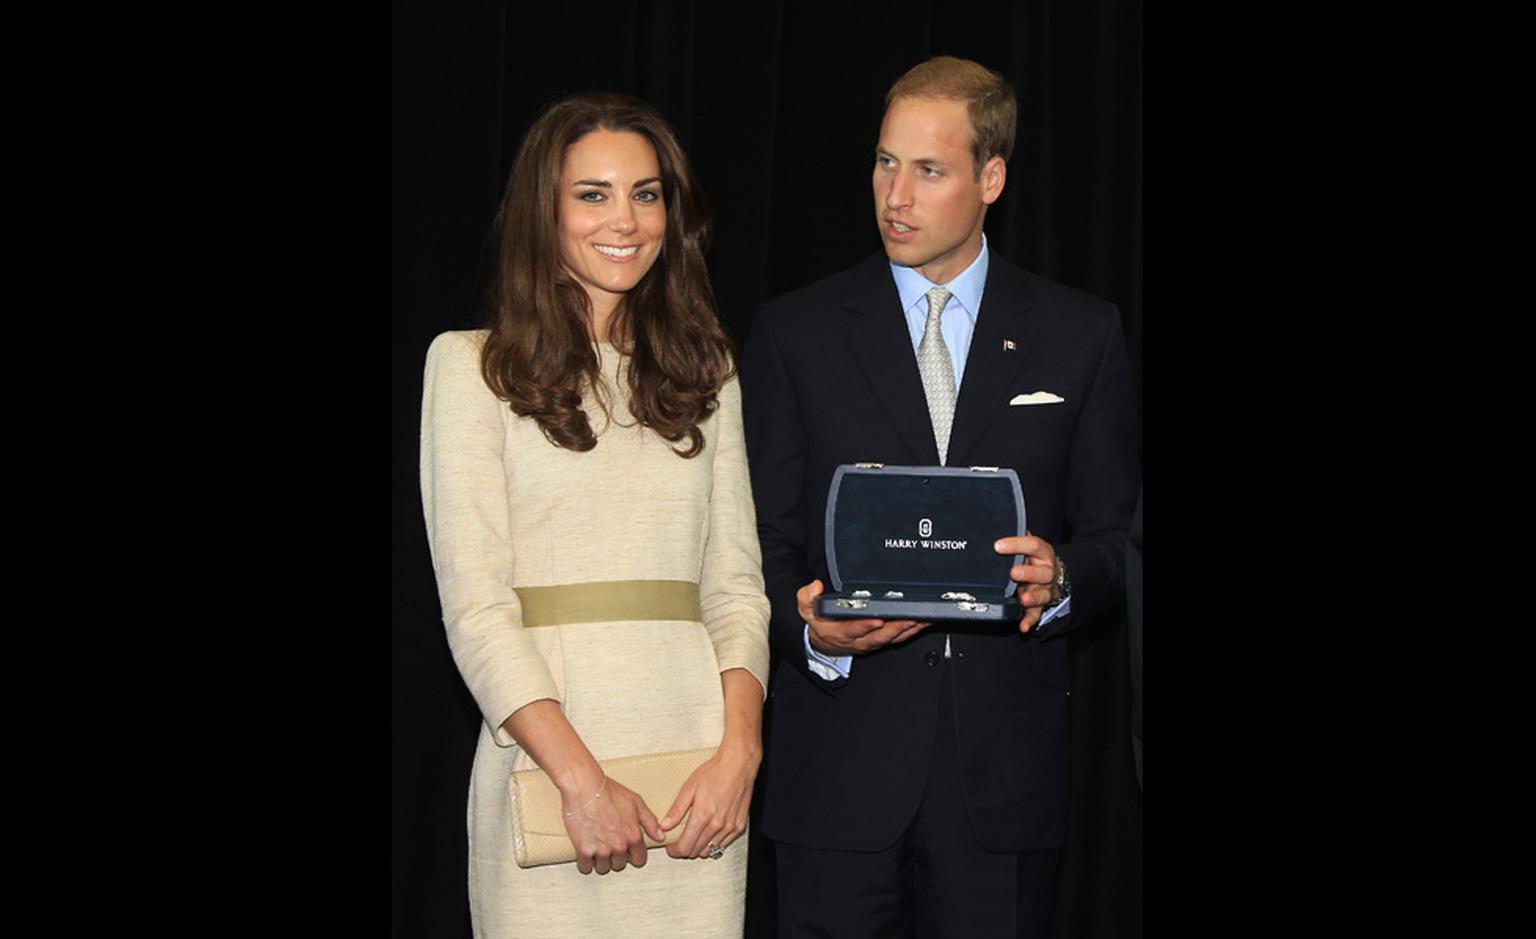 The royal couple with their gift from the Northwest Territories on 5  July 2011 during their state visit to Canada.